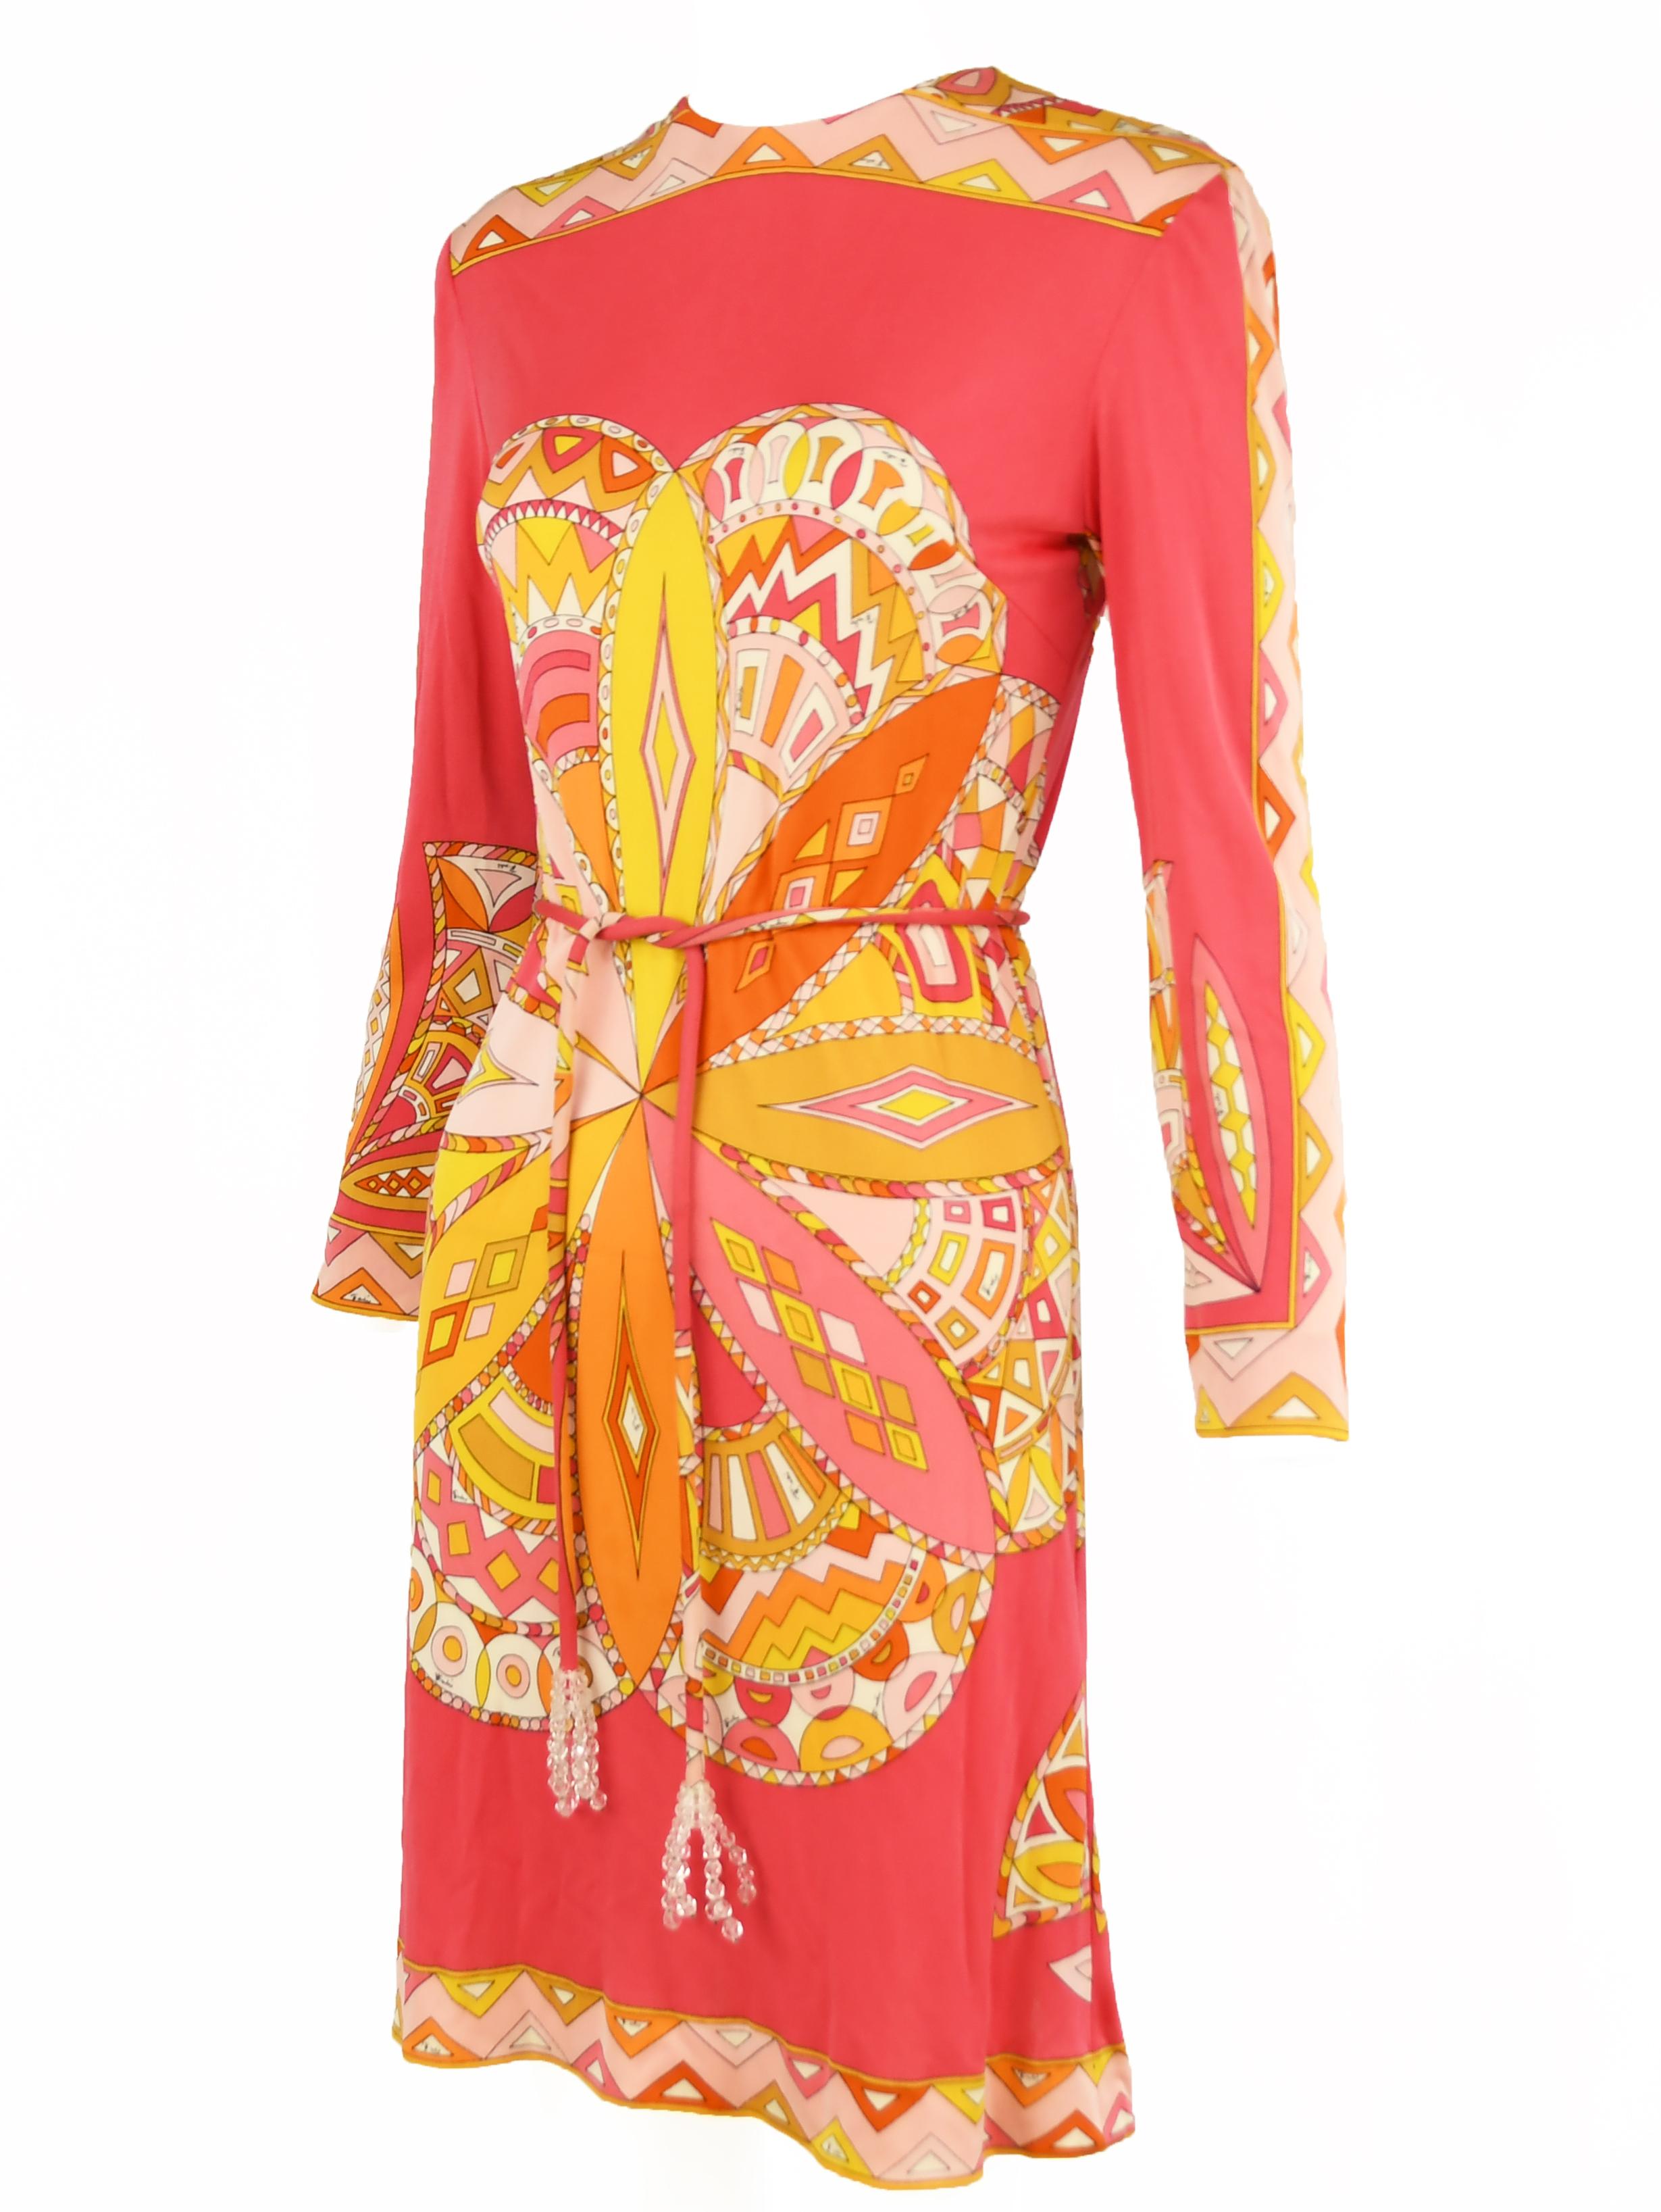 One of a kind vintage Pucci three quarter sleeve dress in stunning coral, yellow and orange.  Optional belt has clear bead tassels at the end.  In excellent vintage condition.  Vintage Pucci tag reads size 12, which converts to approximately a